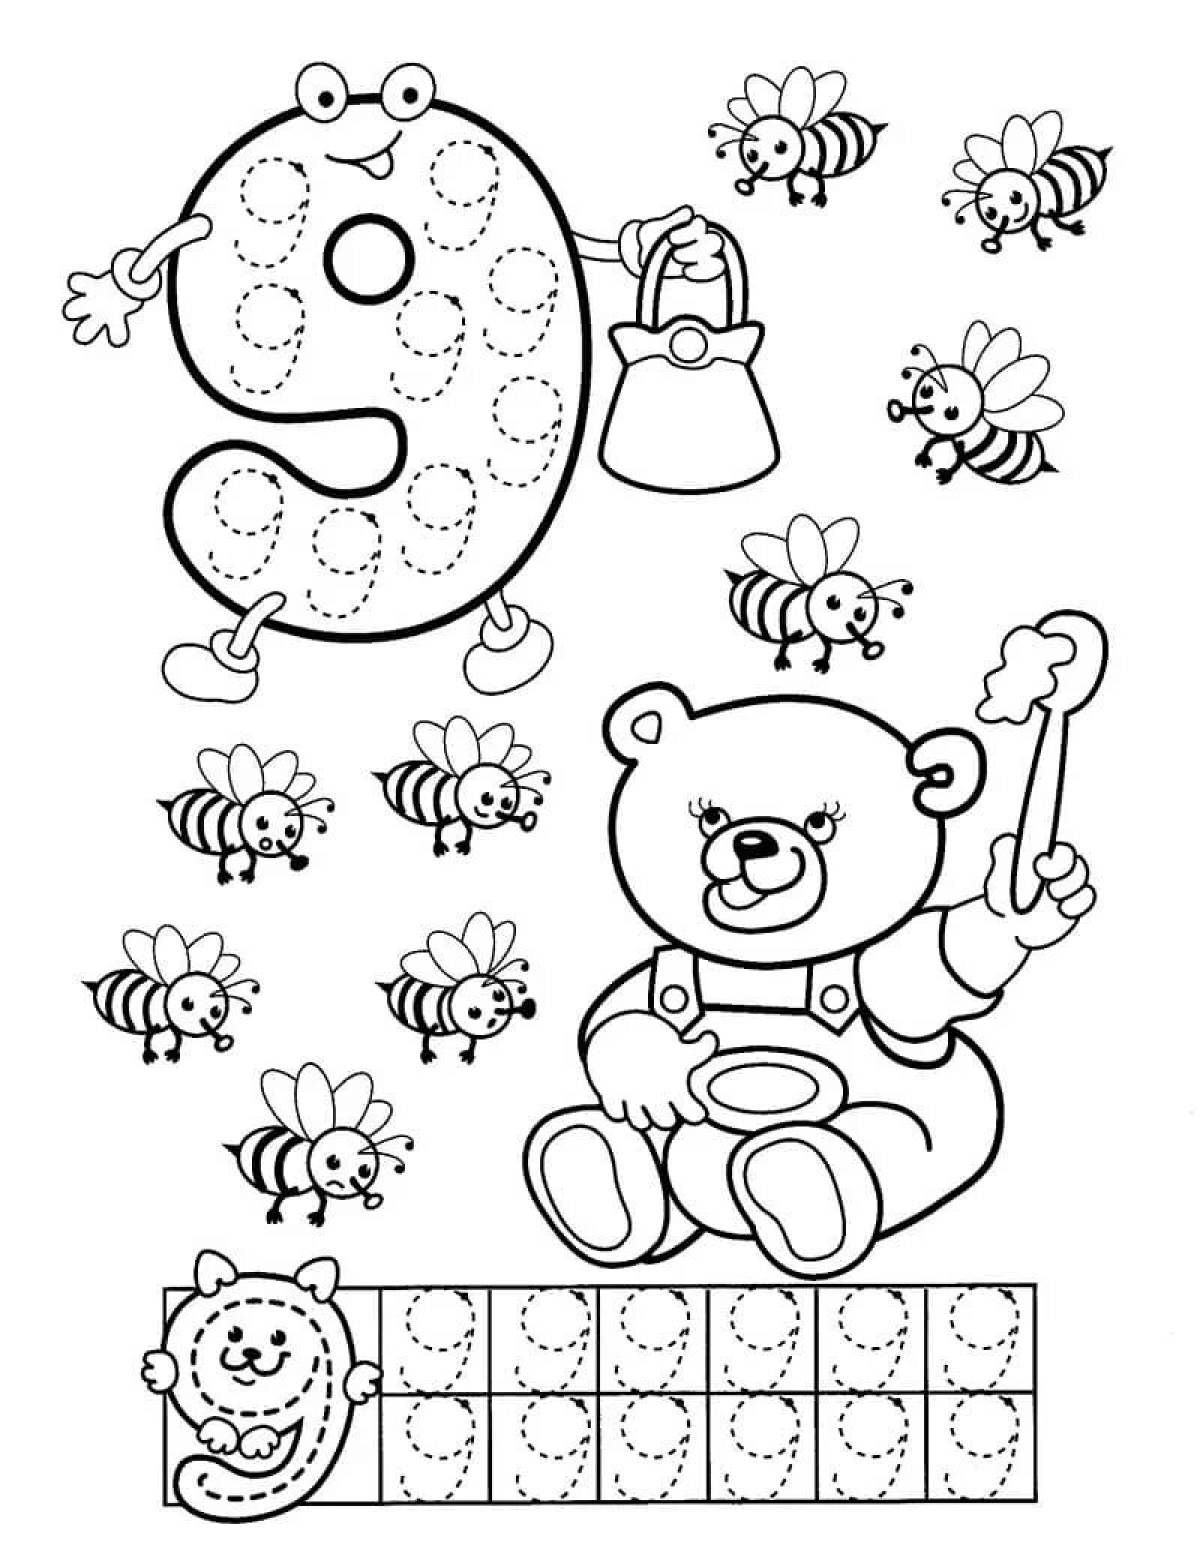 With letters and numbers for preschoolers #23